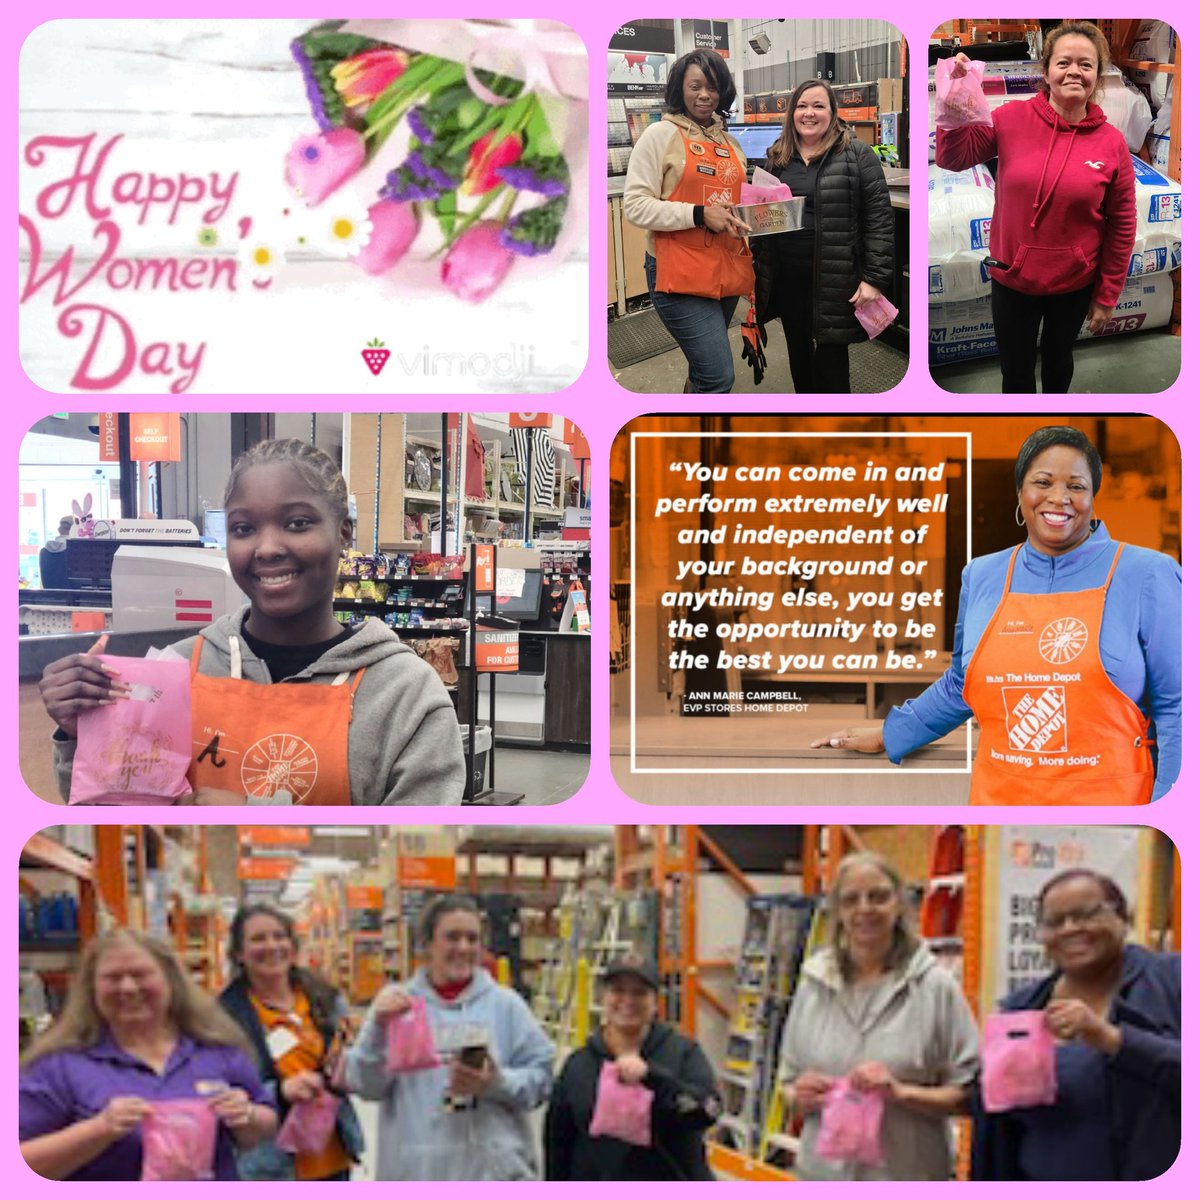 Happy International Women's Day to all the Wonderful Women, working for a company 💕 of Diverse, Dynamic, & Determined Women, we celebrate you all today. #OneTeamOneFight @HillaryHyatt @kmn293 @ShawndaSobless1 @Jme_Dvs